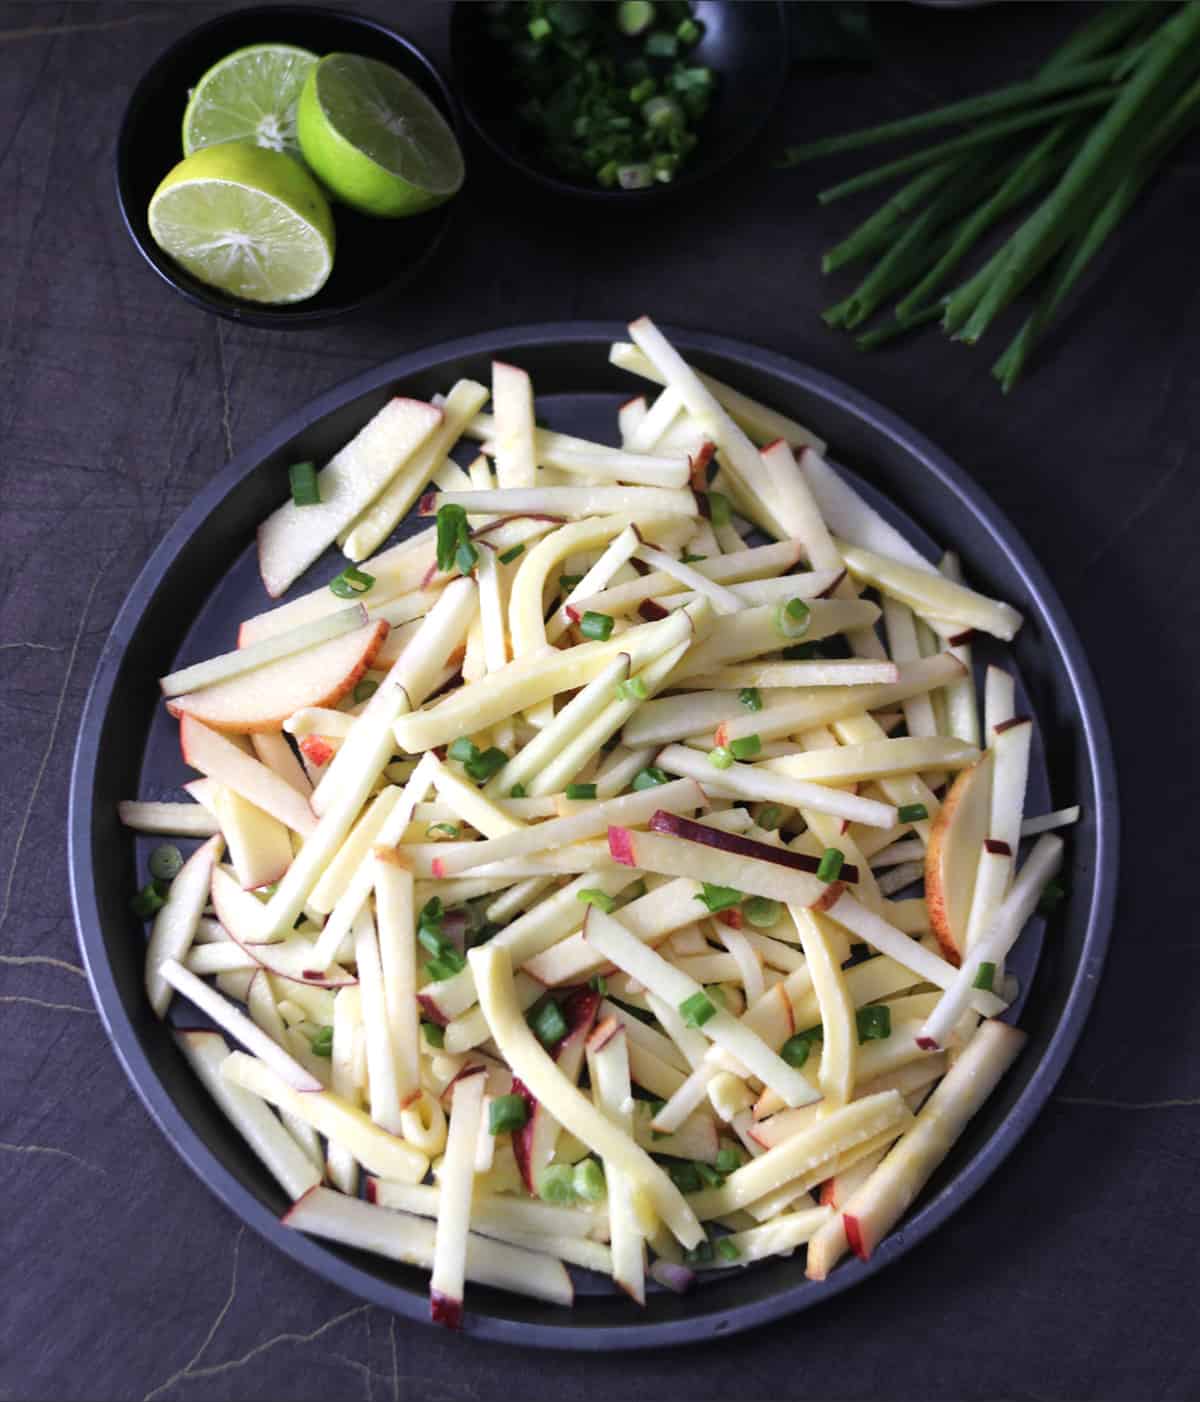 Top view of apple matchstick salad recipe with cheese in less than 5 minutes